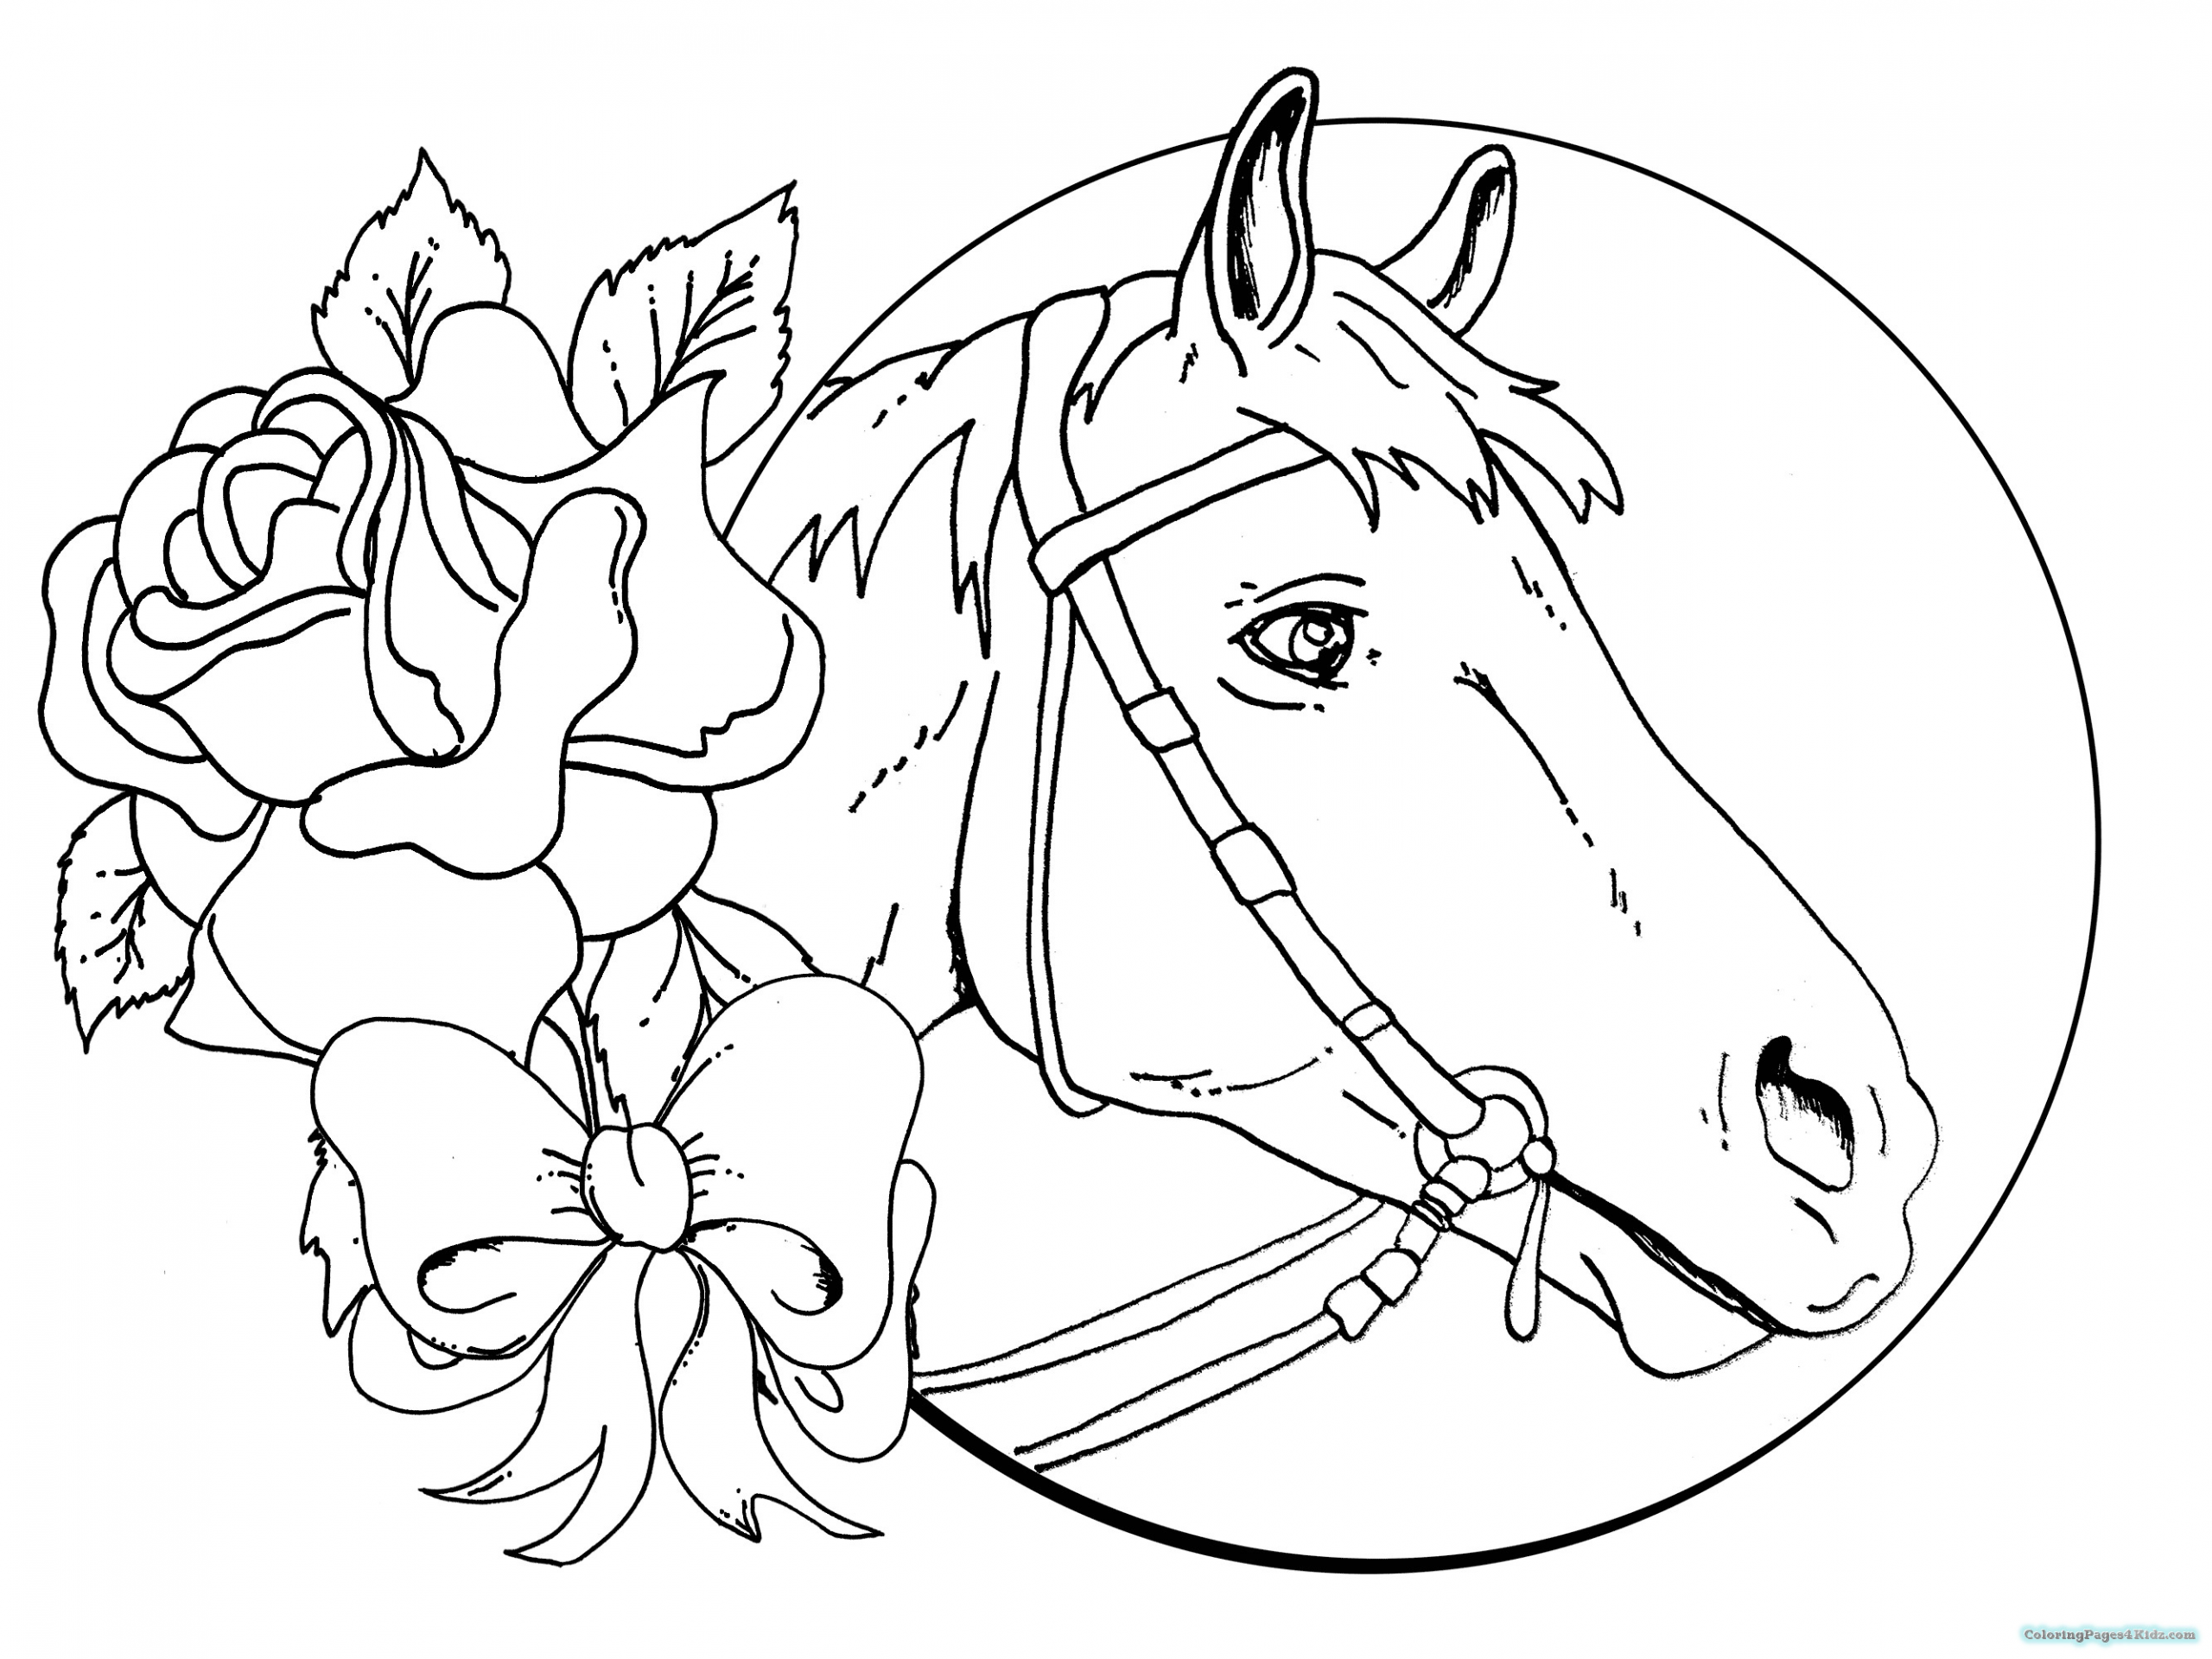 Baby Horse Coloring Page
 Coloring Pages A Horse A Newborn Baby